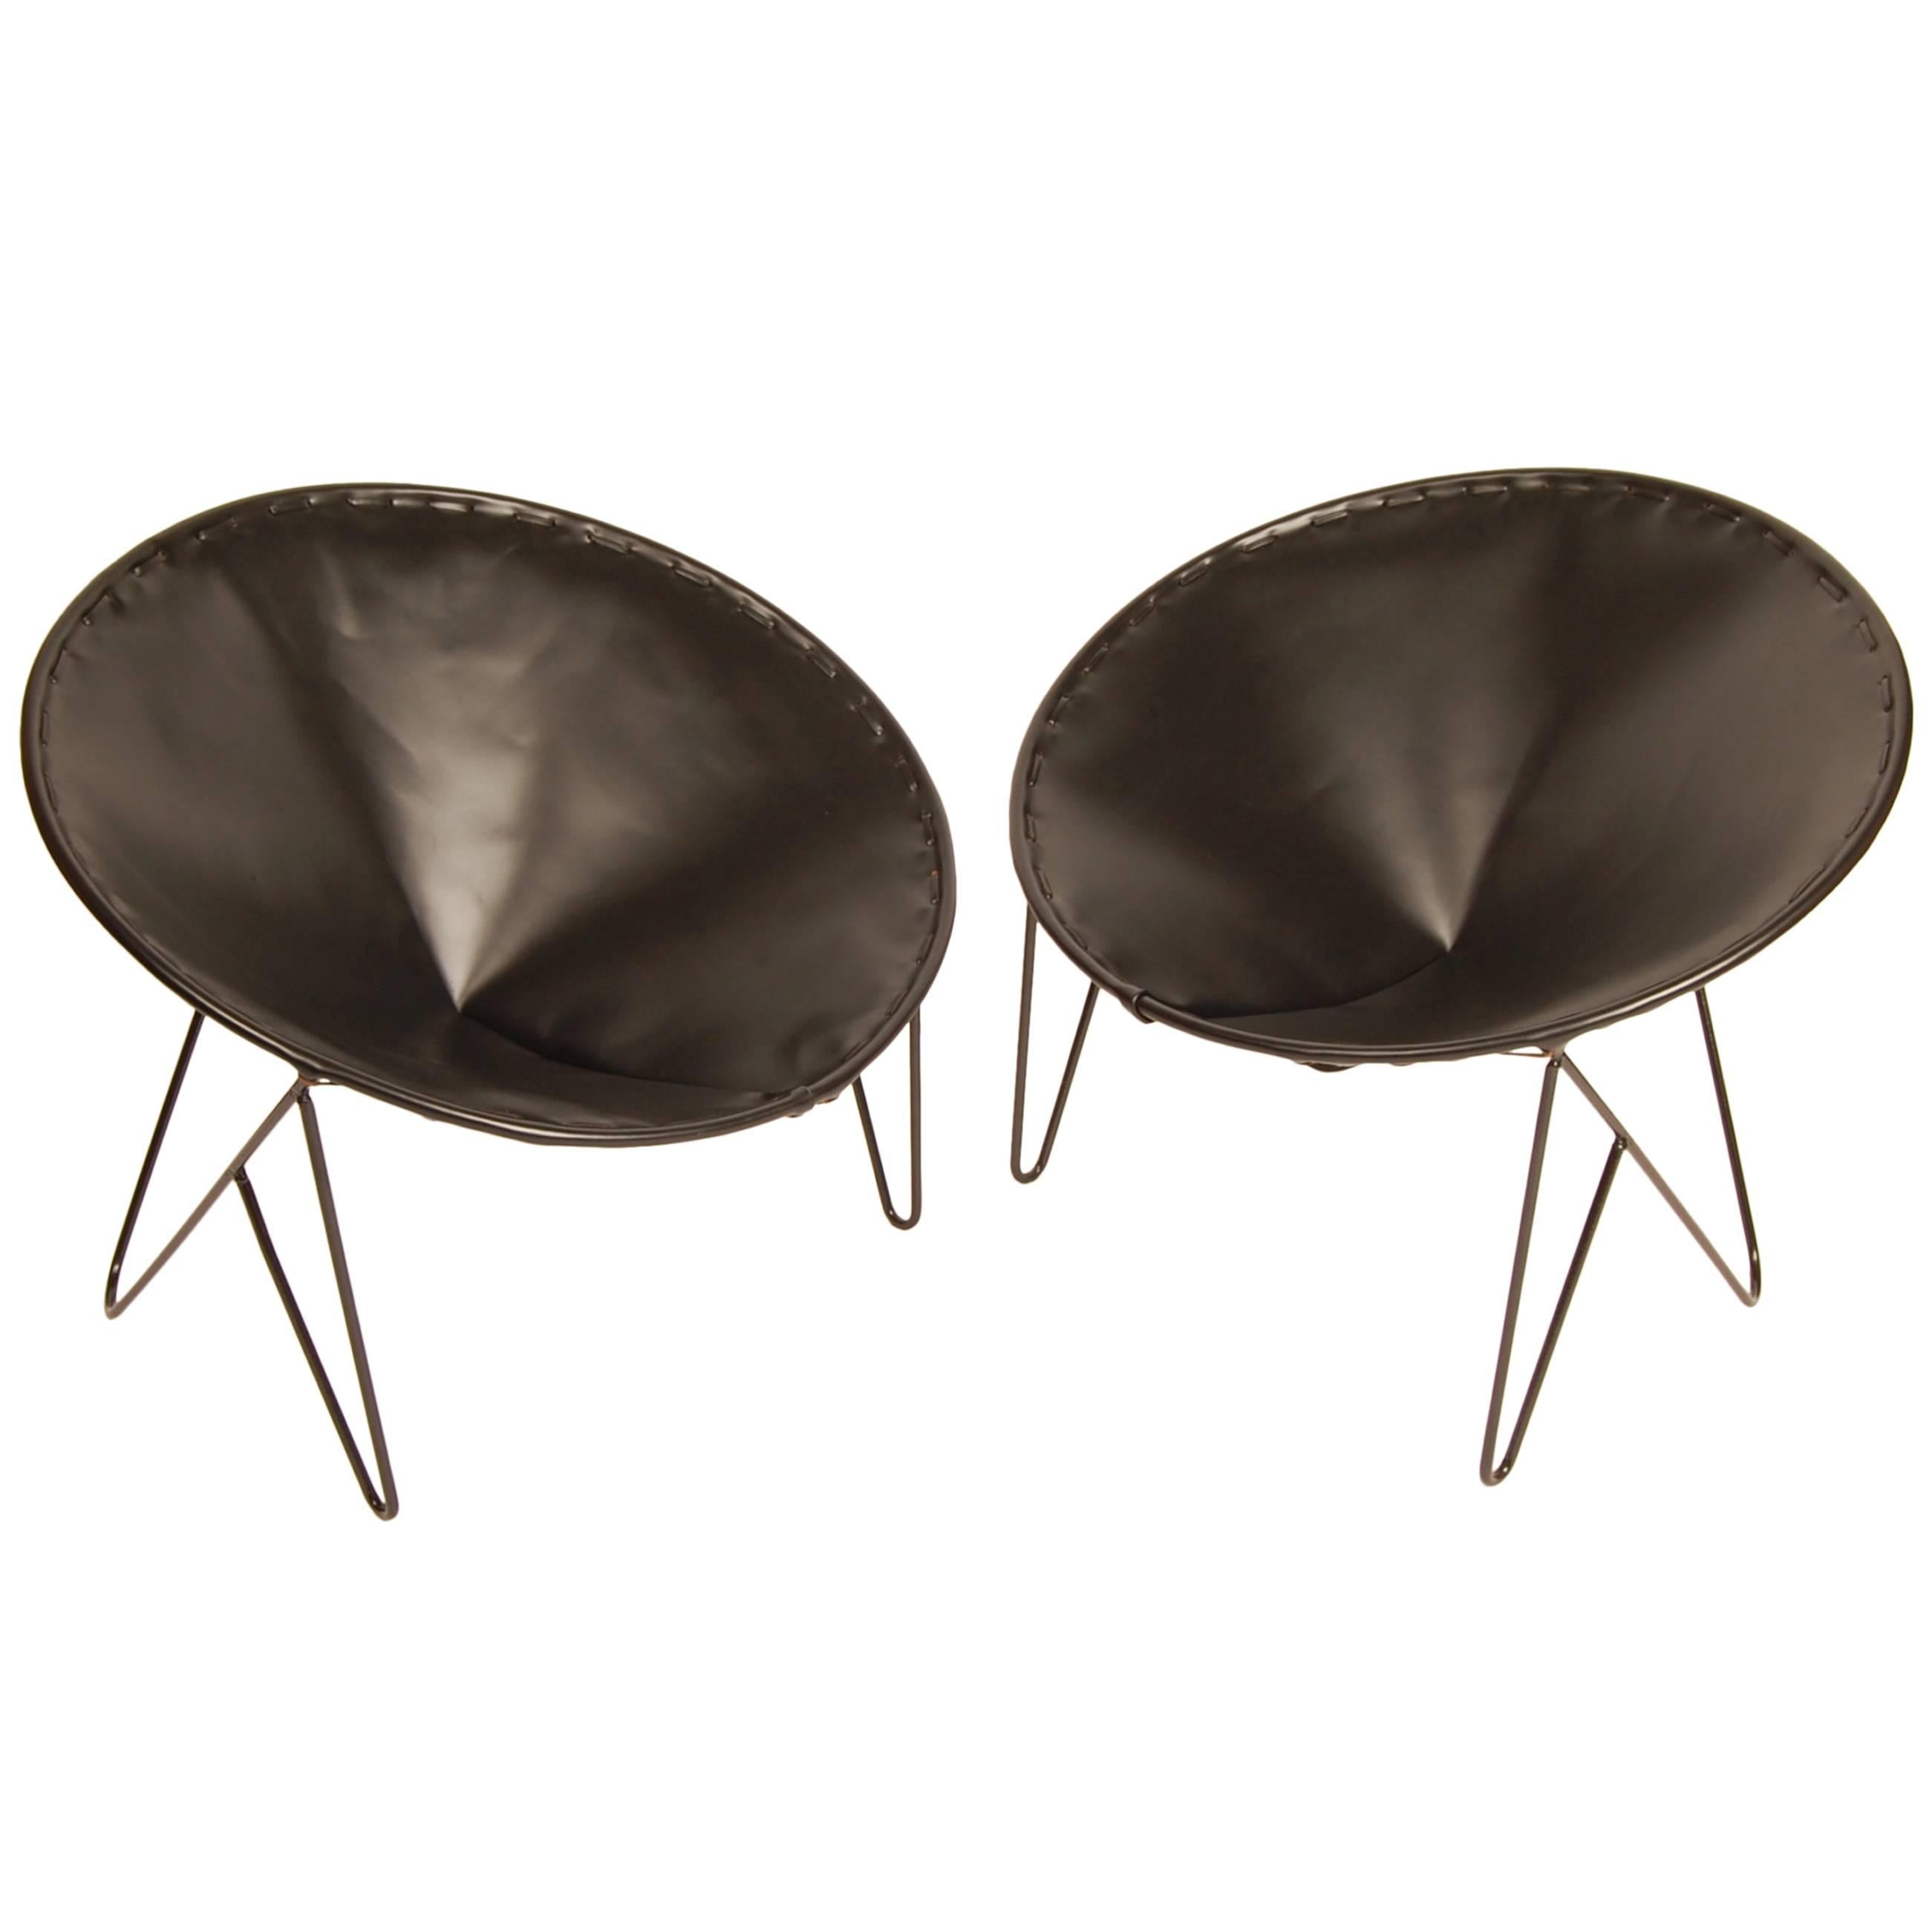 1950s California Iron Fortune Cookie Chairs